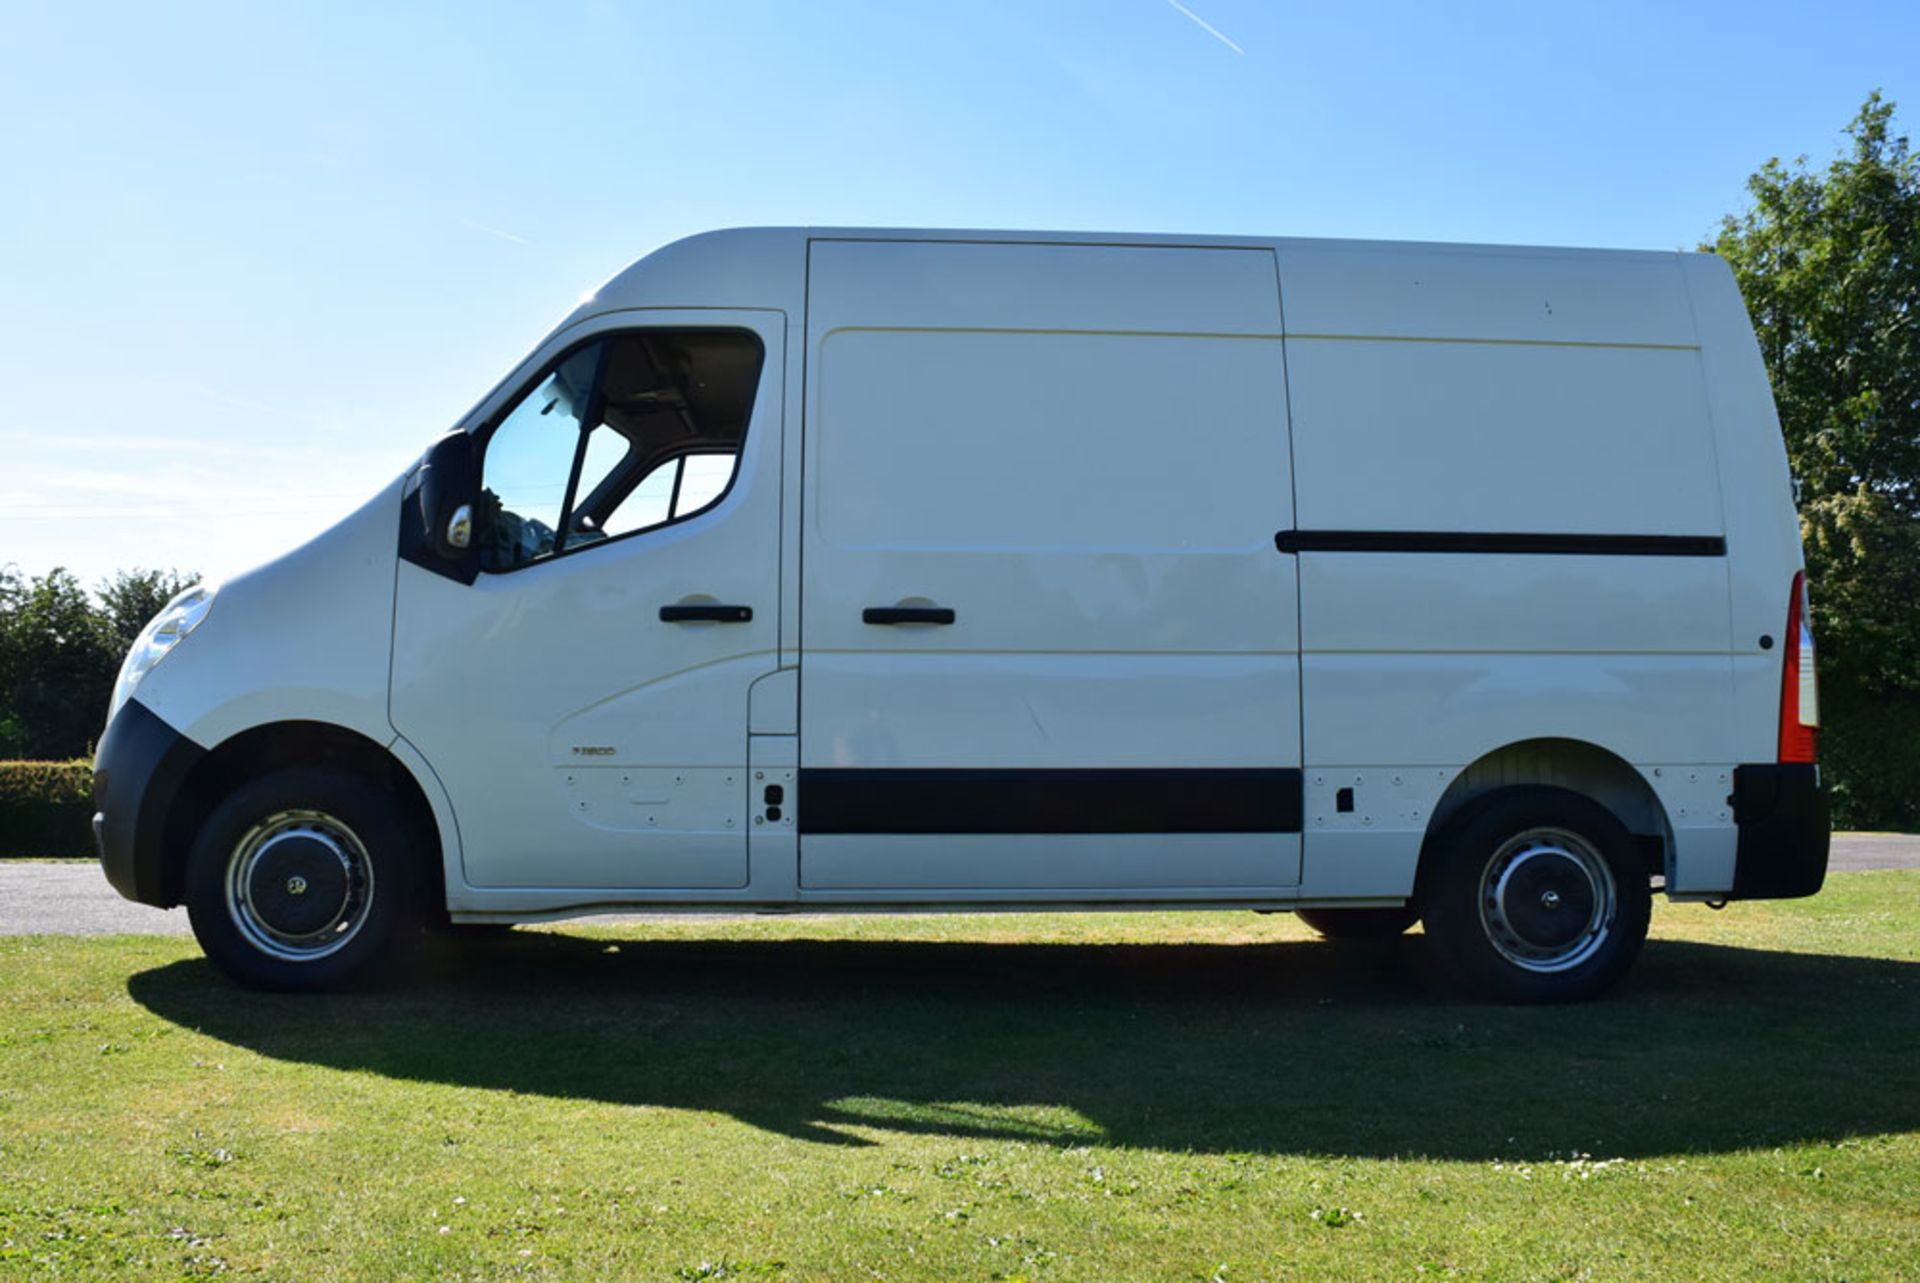 2013 Vauxhall Movano F3500 CDTI L2H2 Panel Van With Ramp, Winch And Washable Lining - Image 4 of 14